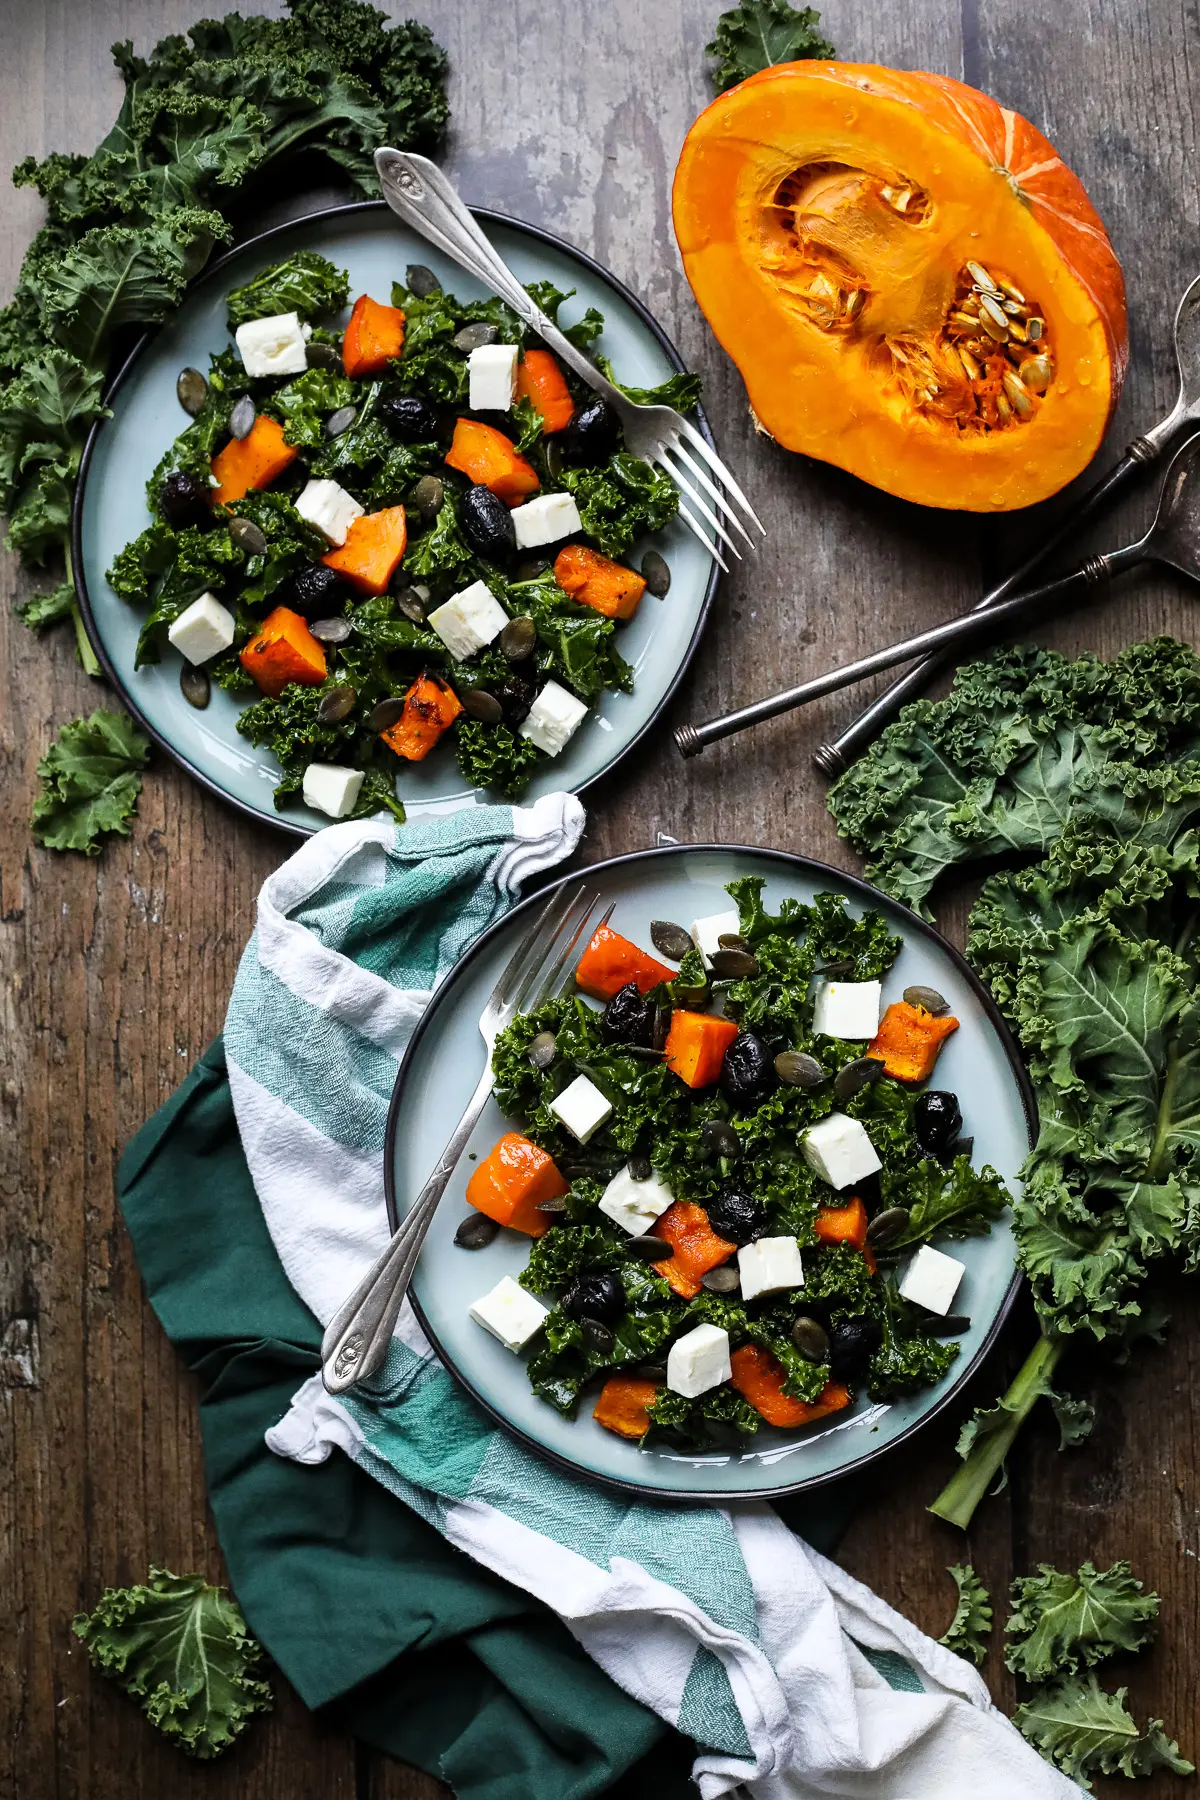 Plates with kale salad with pumpkin and feta.